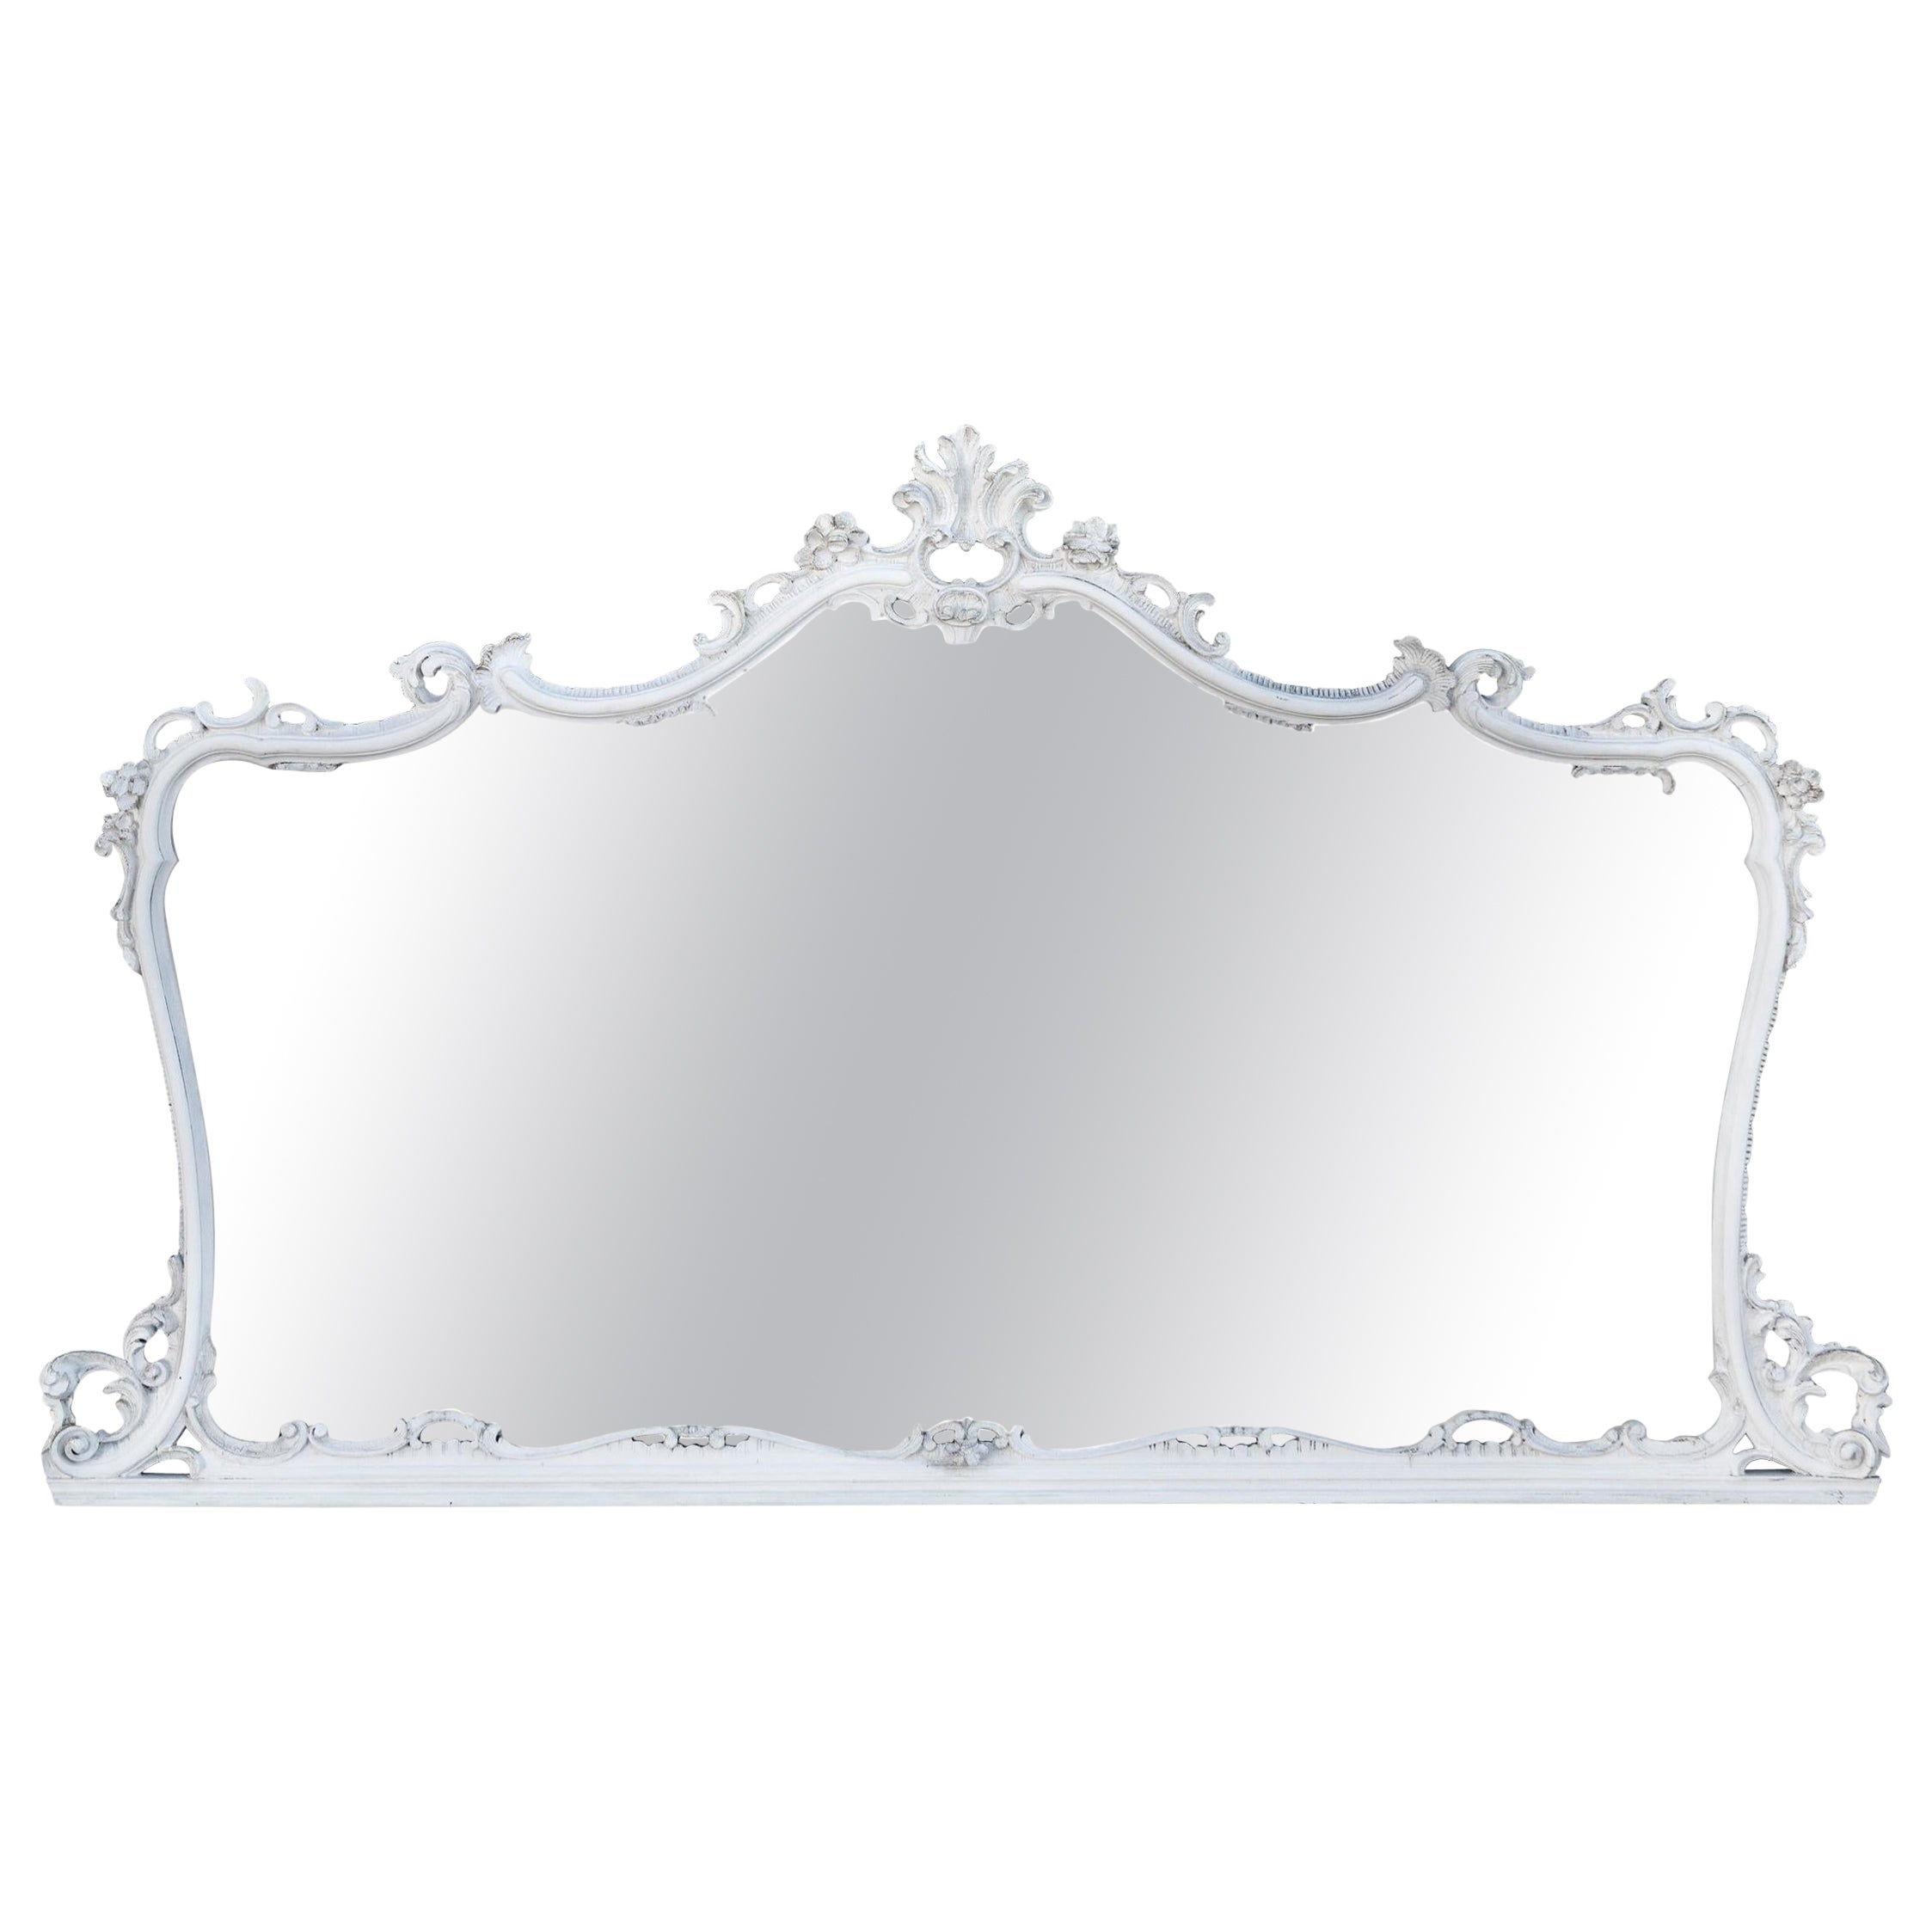 Monumental Italian Hand carved White Mantle Mirror